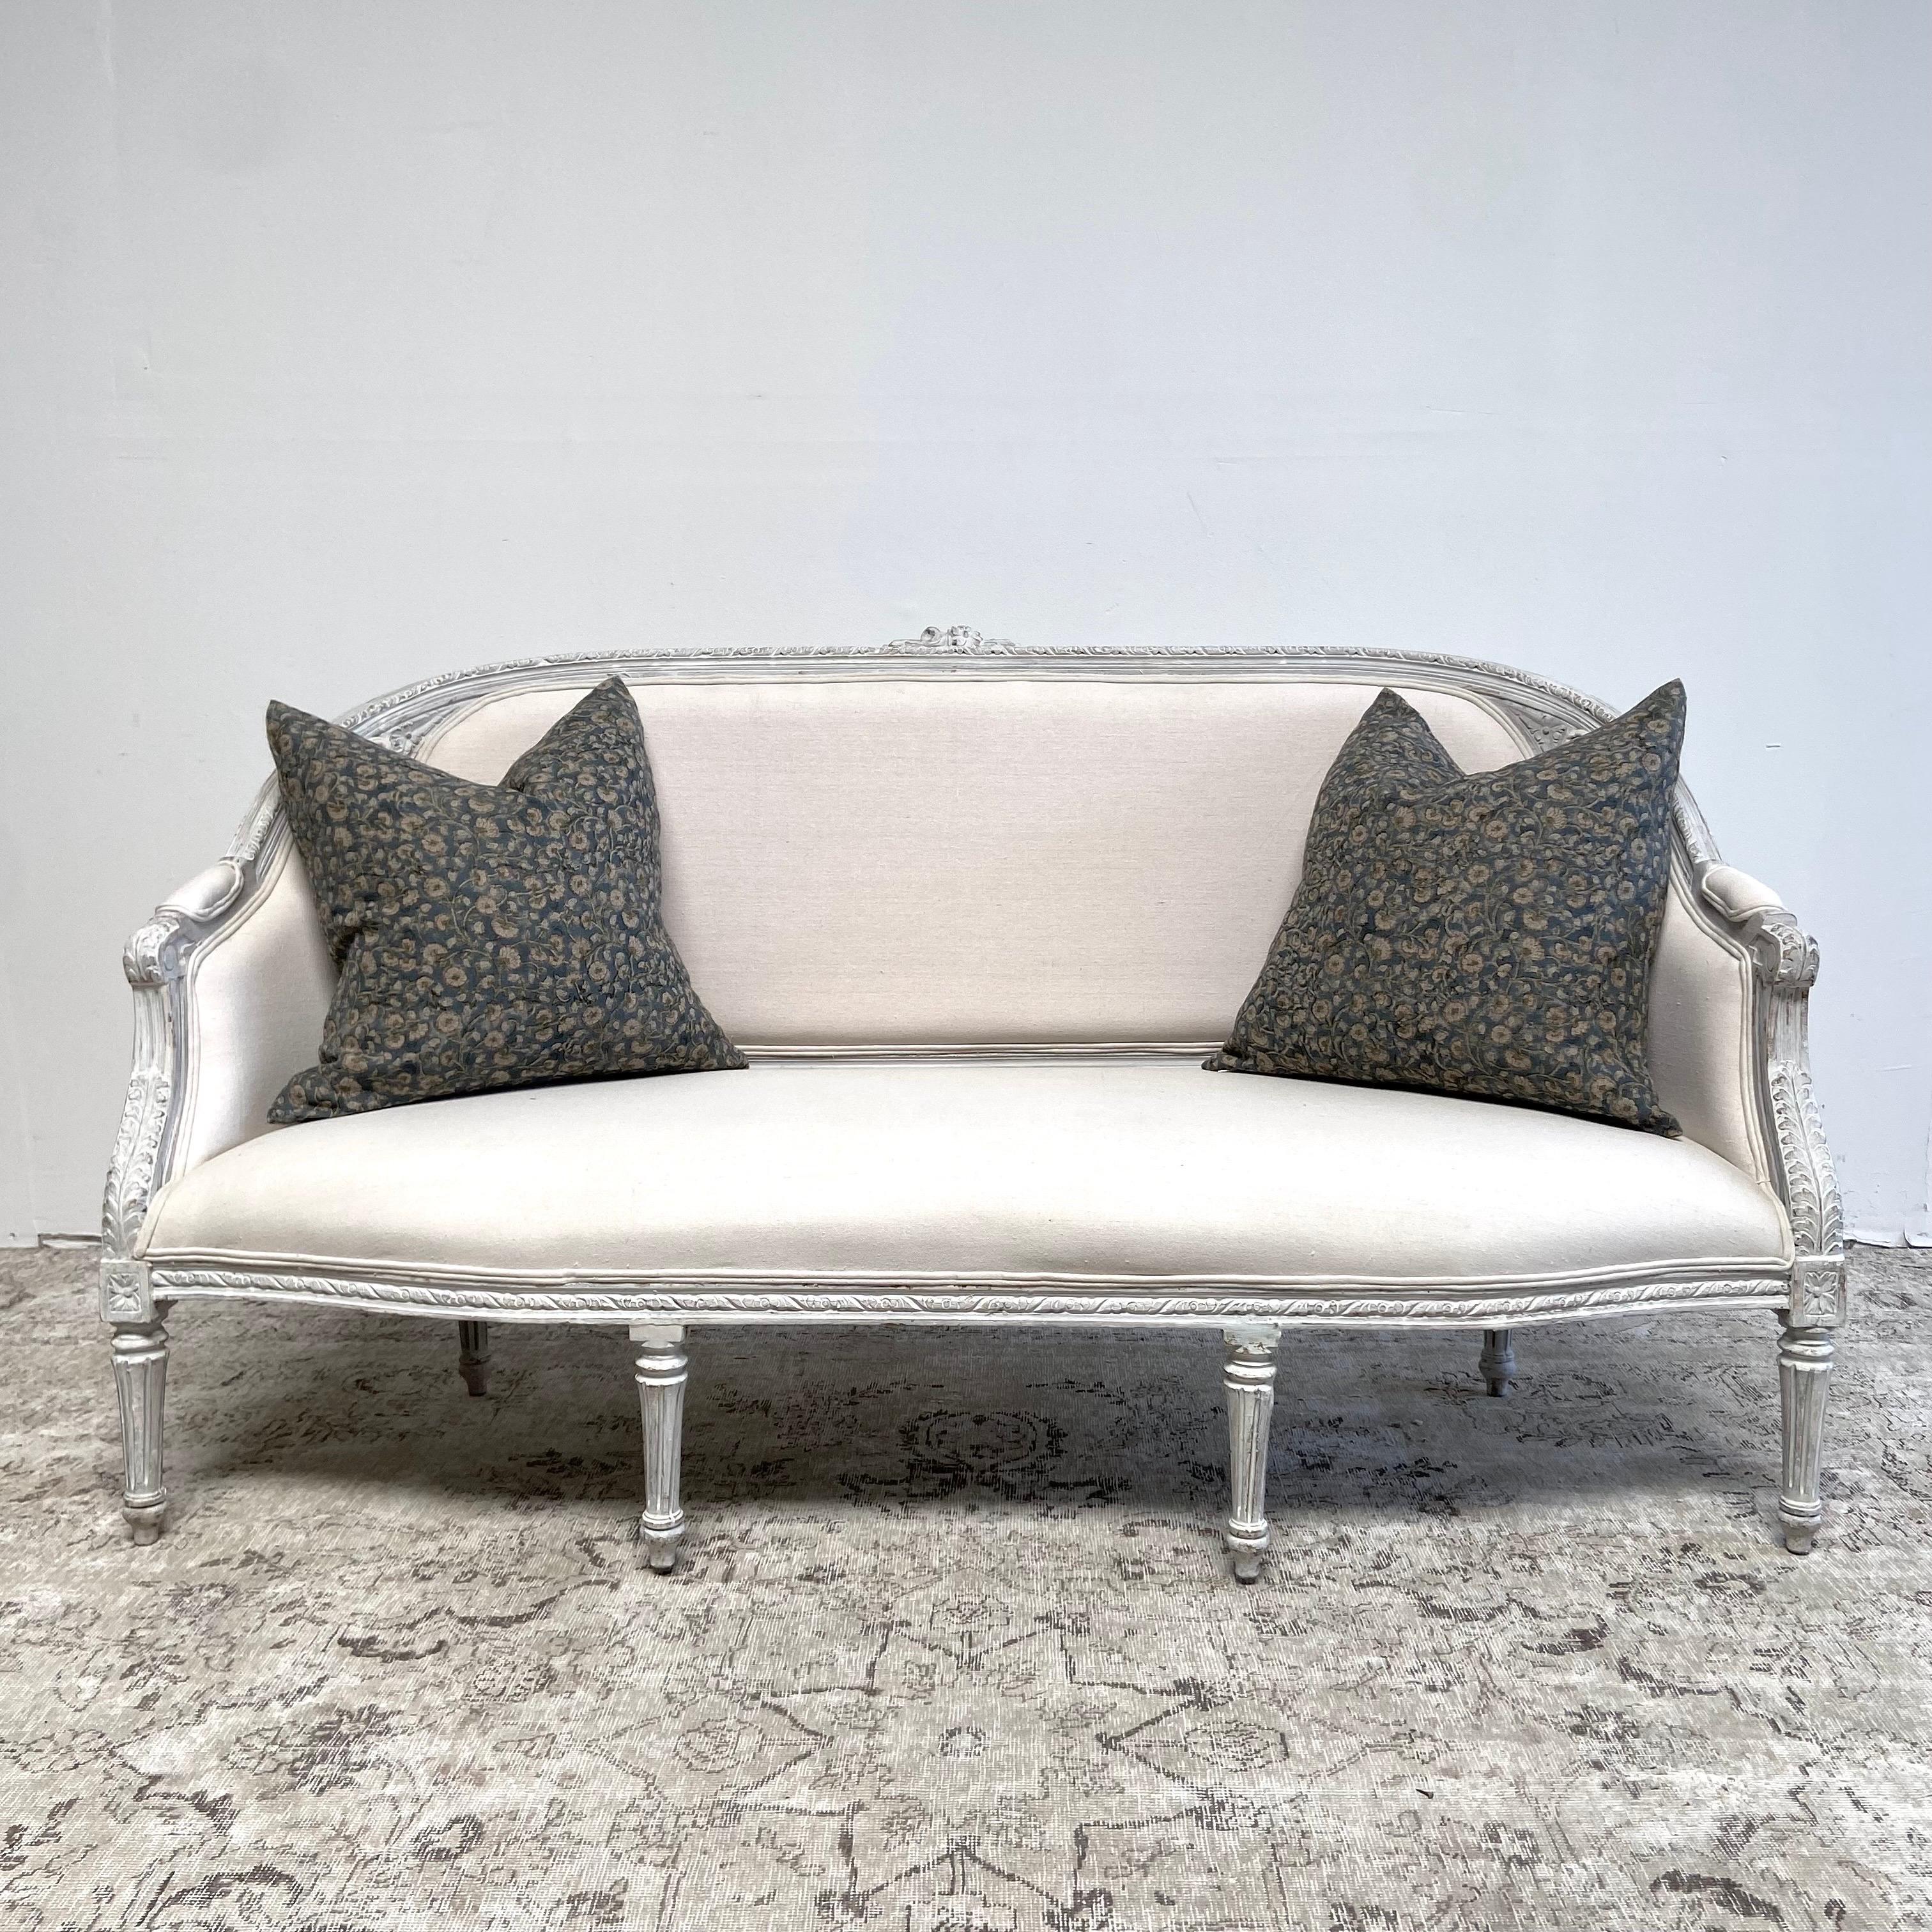 Painted and Upholstered French Style Settee.
Sturdy ready for everyday use. Can be reupholstered for an additional fee.
French gray paint with distressed finish, and antique patina.
Louis XVI style fluted legs with Classic fluerettes, and rose